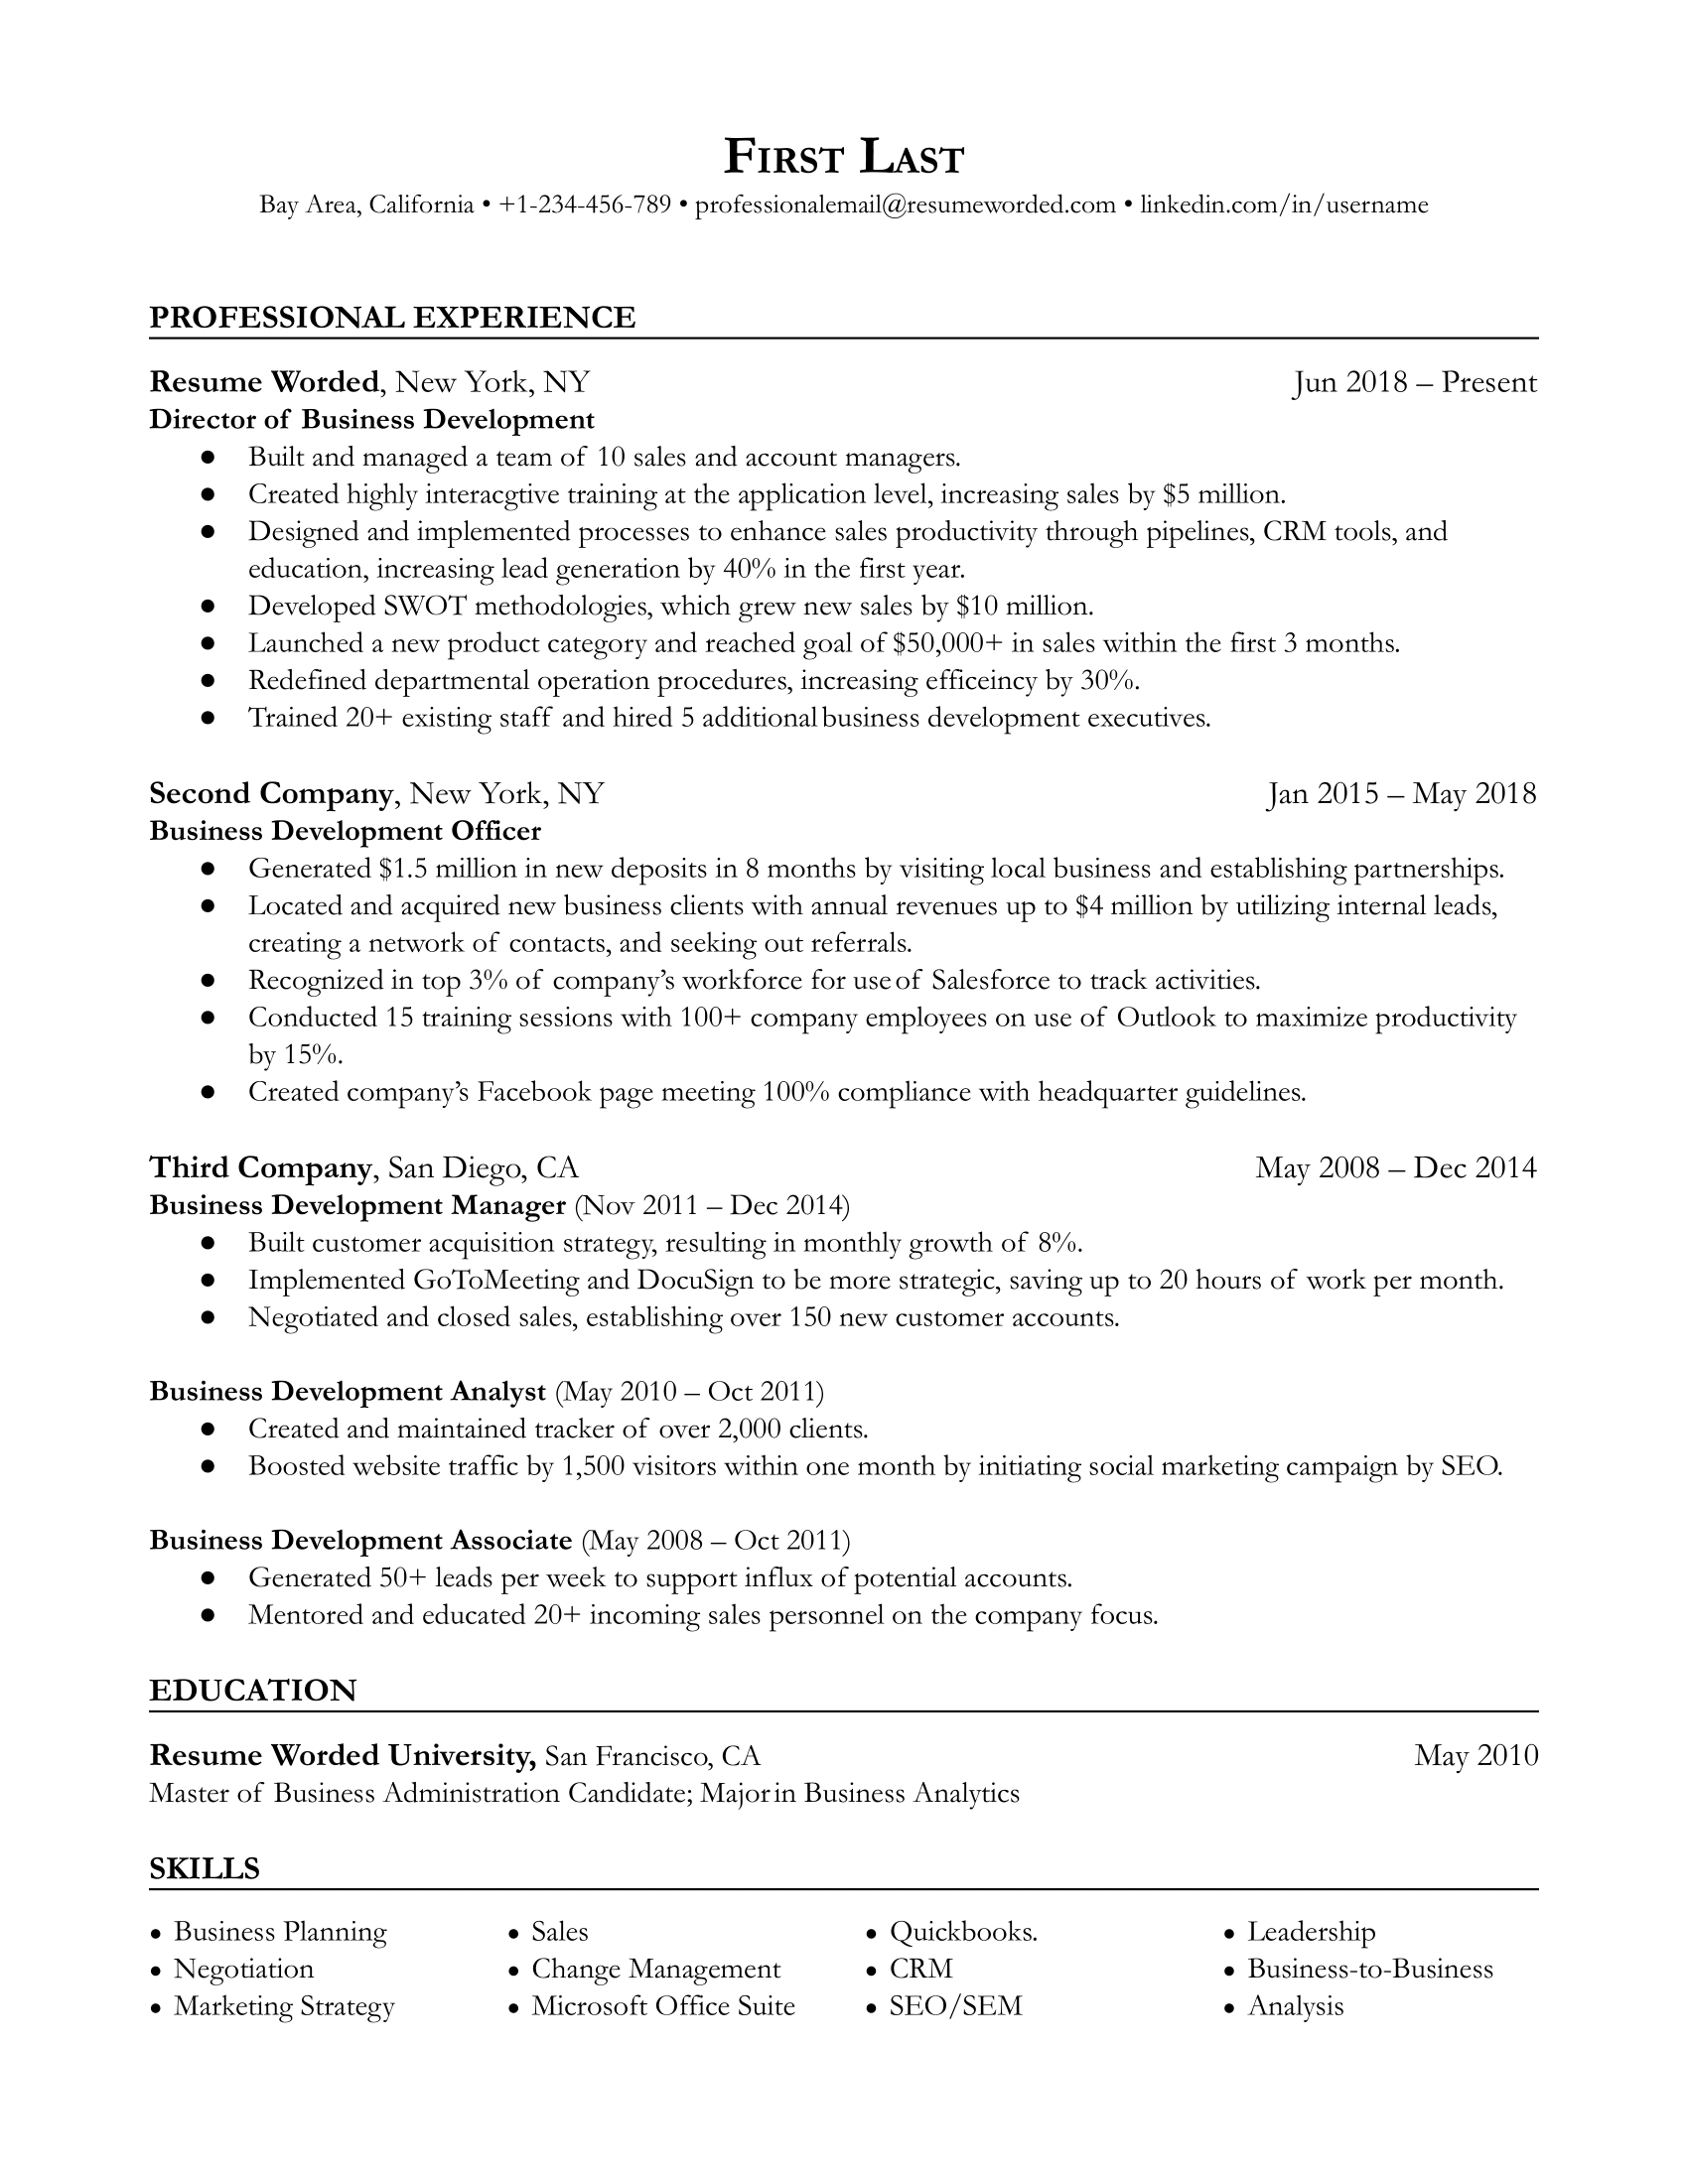 Director of Business Development Resume Template + Example